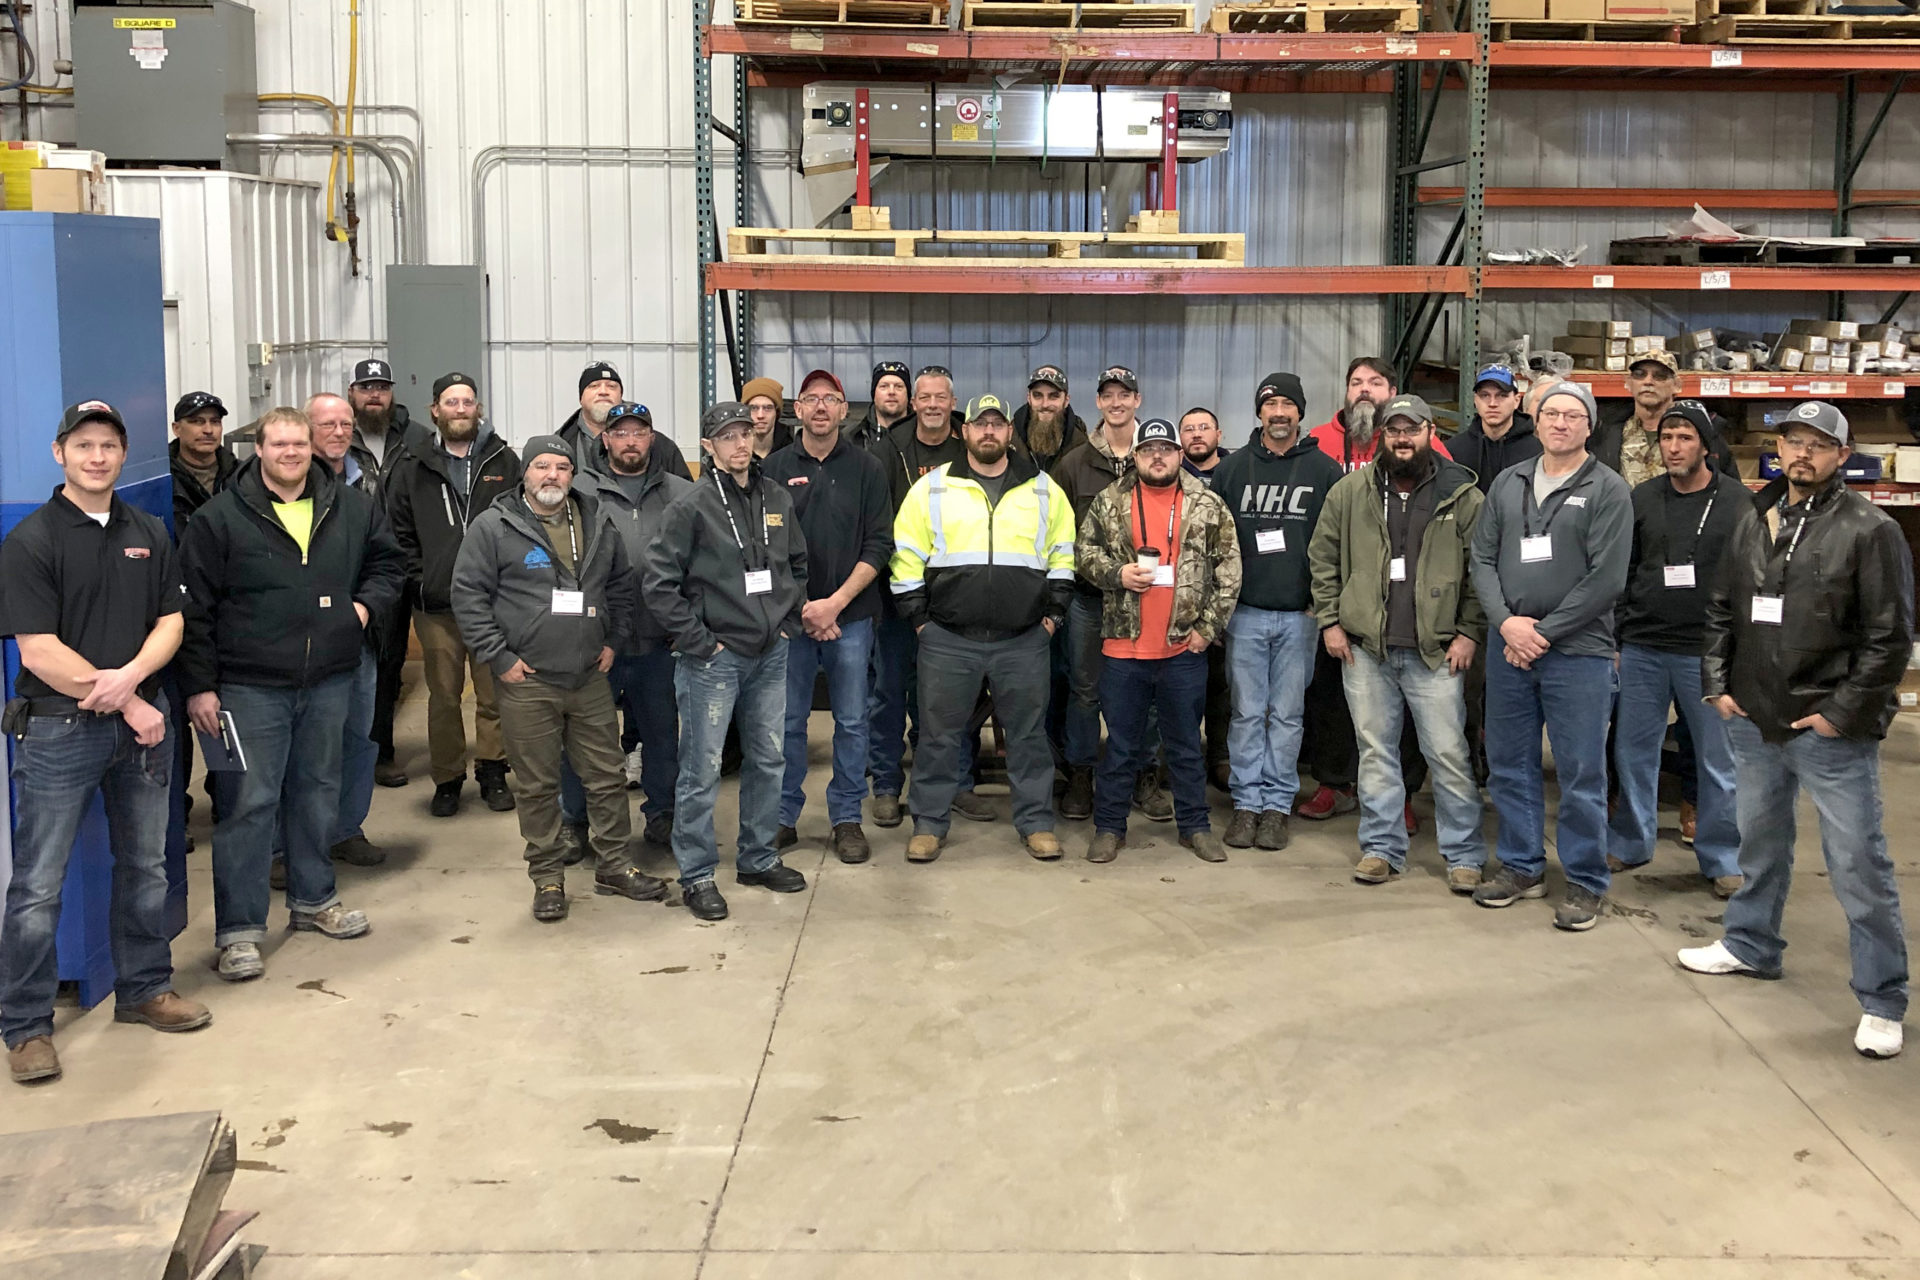 Machine owners from all over the country pose together at Rotochopper's Rotochopper University training event.